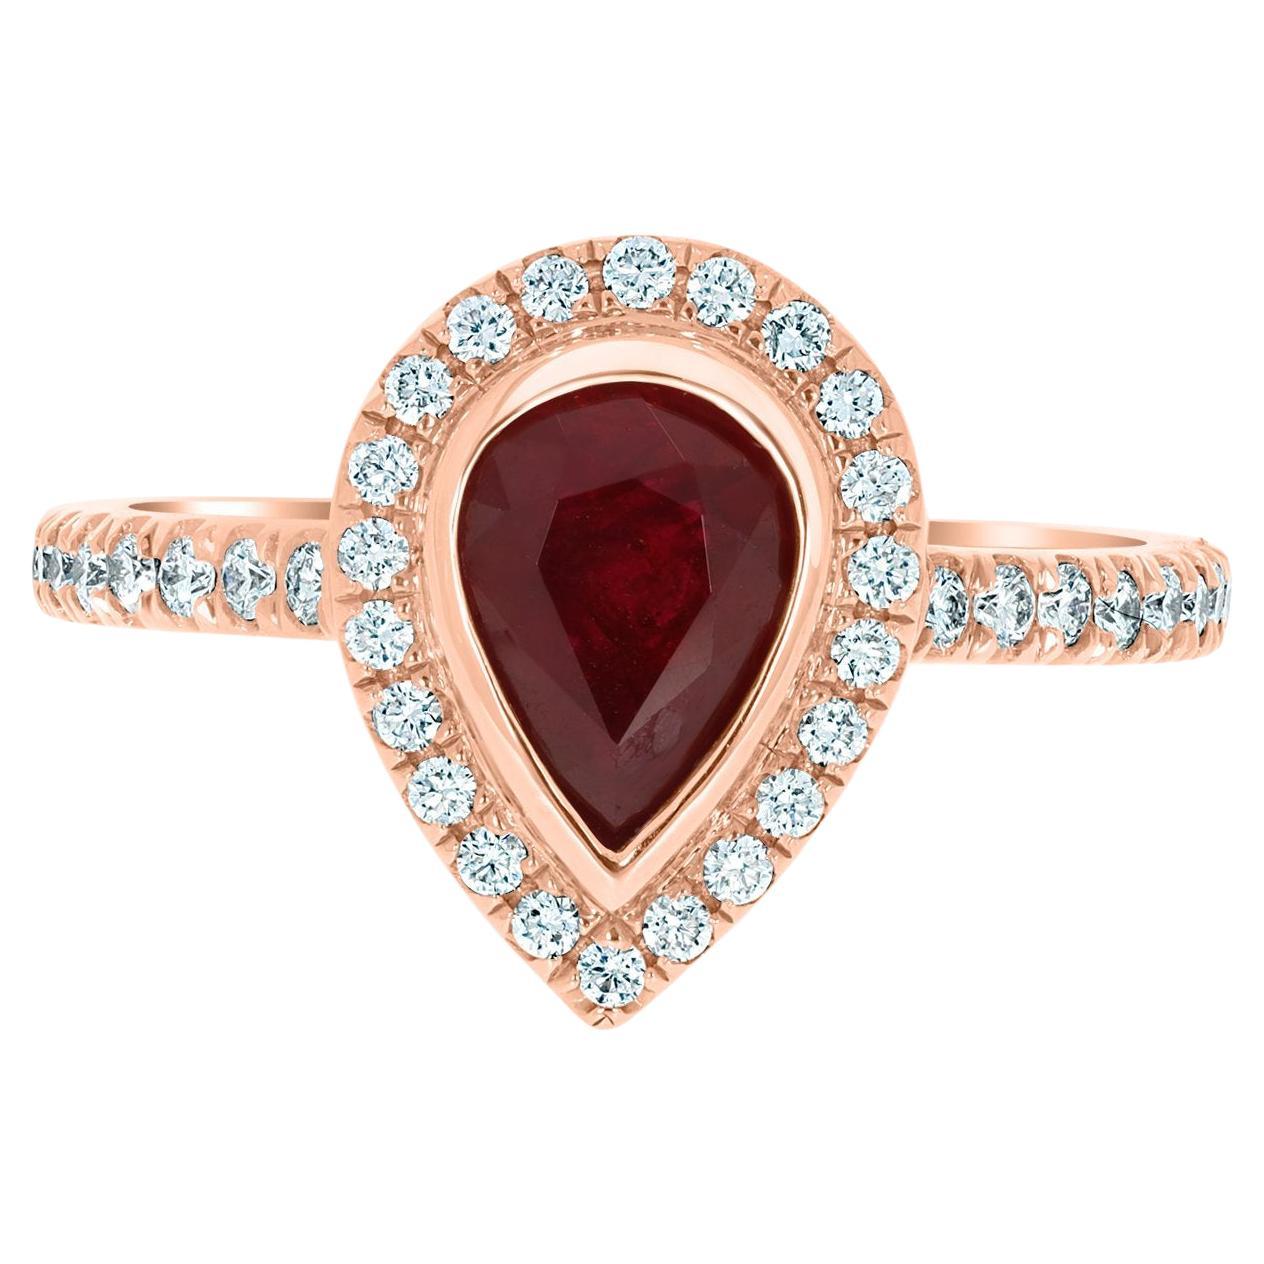 1.08 Ct Ruby Ring with 0.32 Tct Diamonds Set in 14K Rose Gold